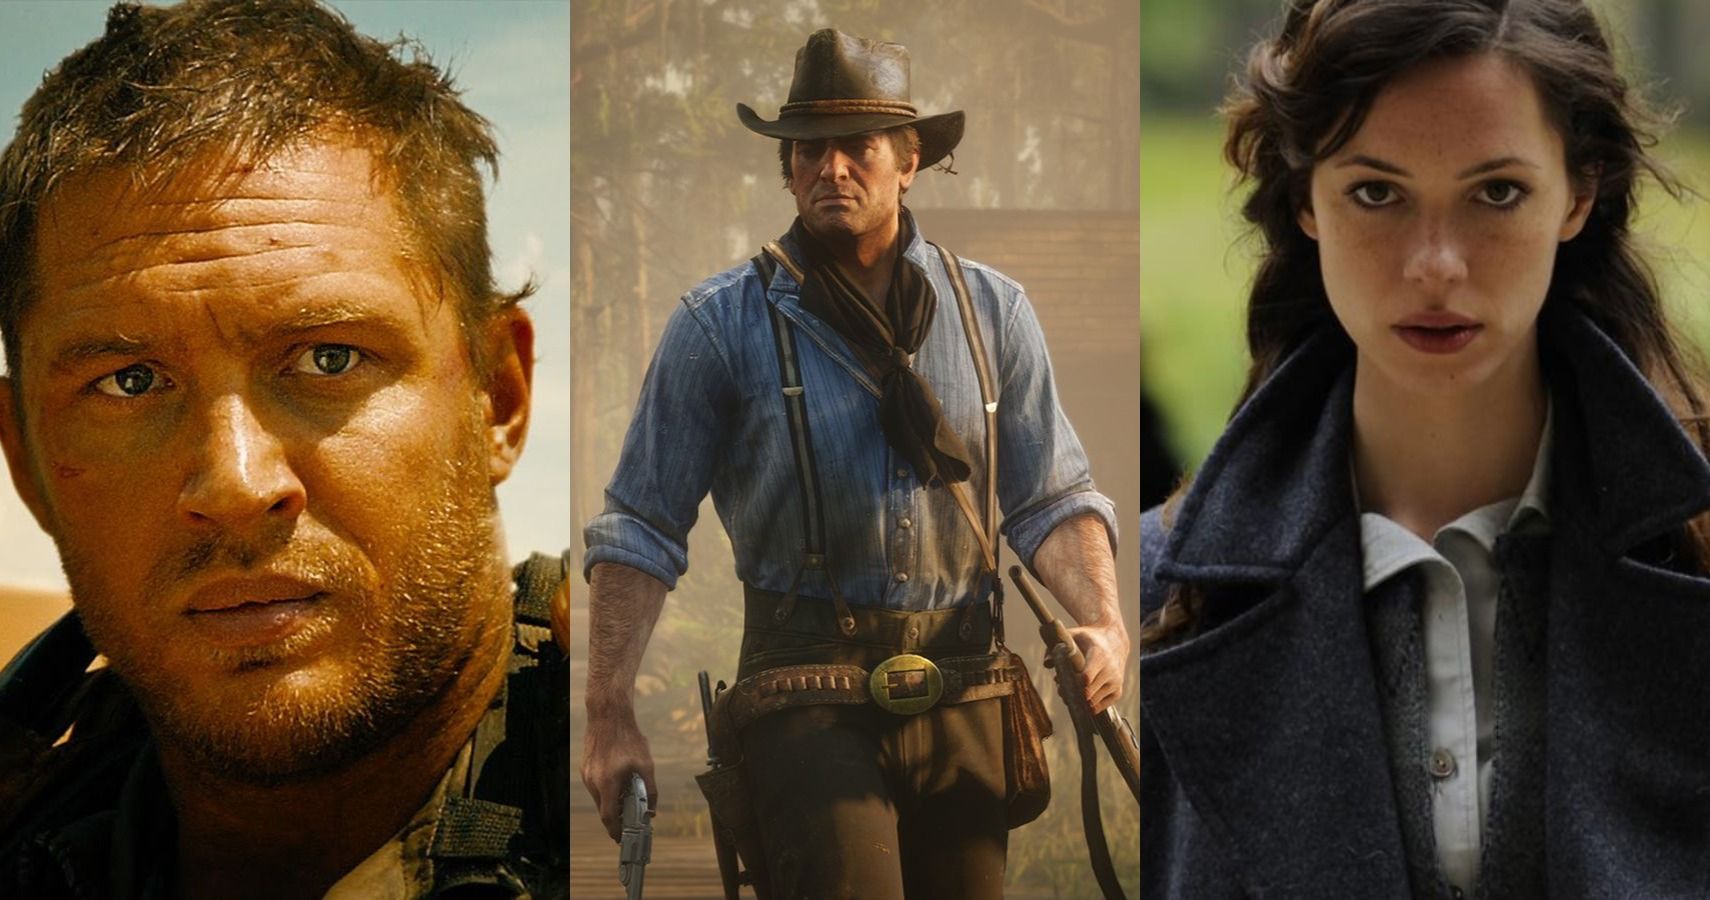 Fan Casting The Movie Version Of Dead Redemption 2